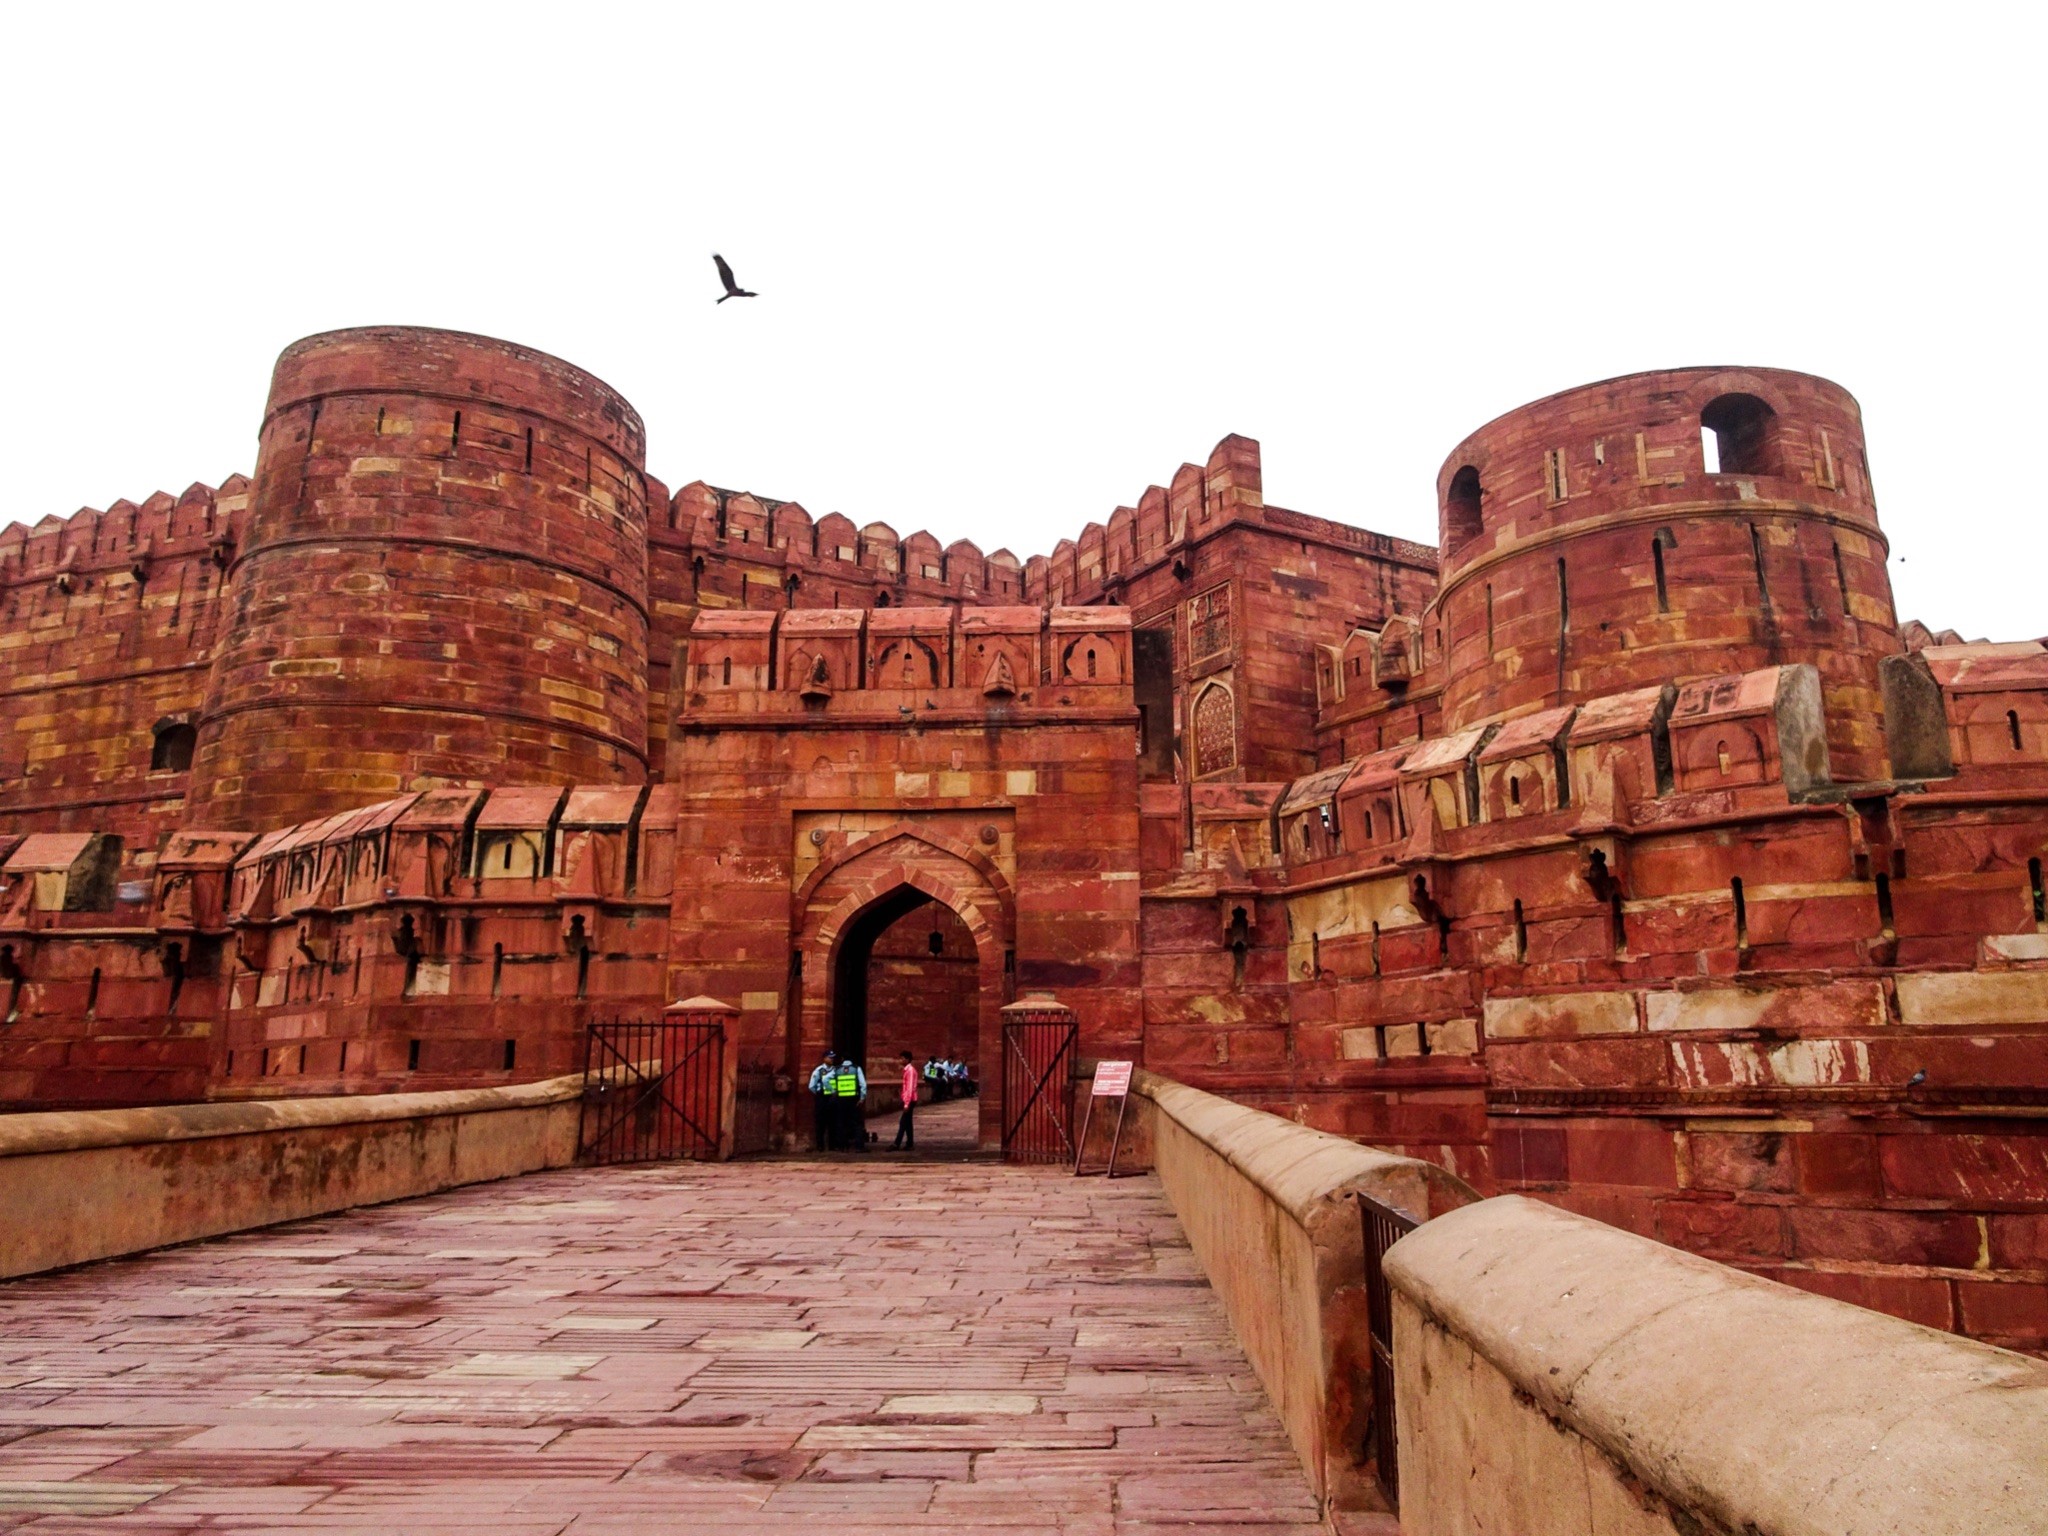 A general view of the Agra Fort. Image Source: Wikimedia Commons